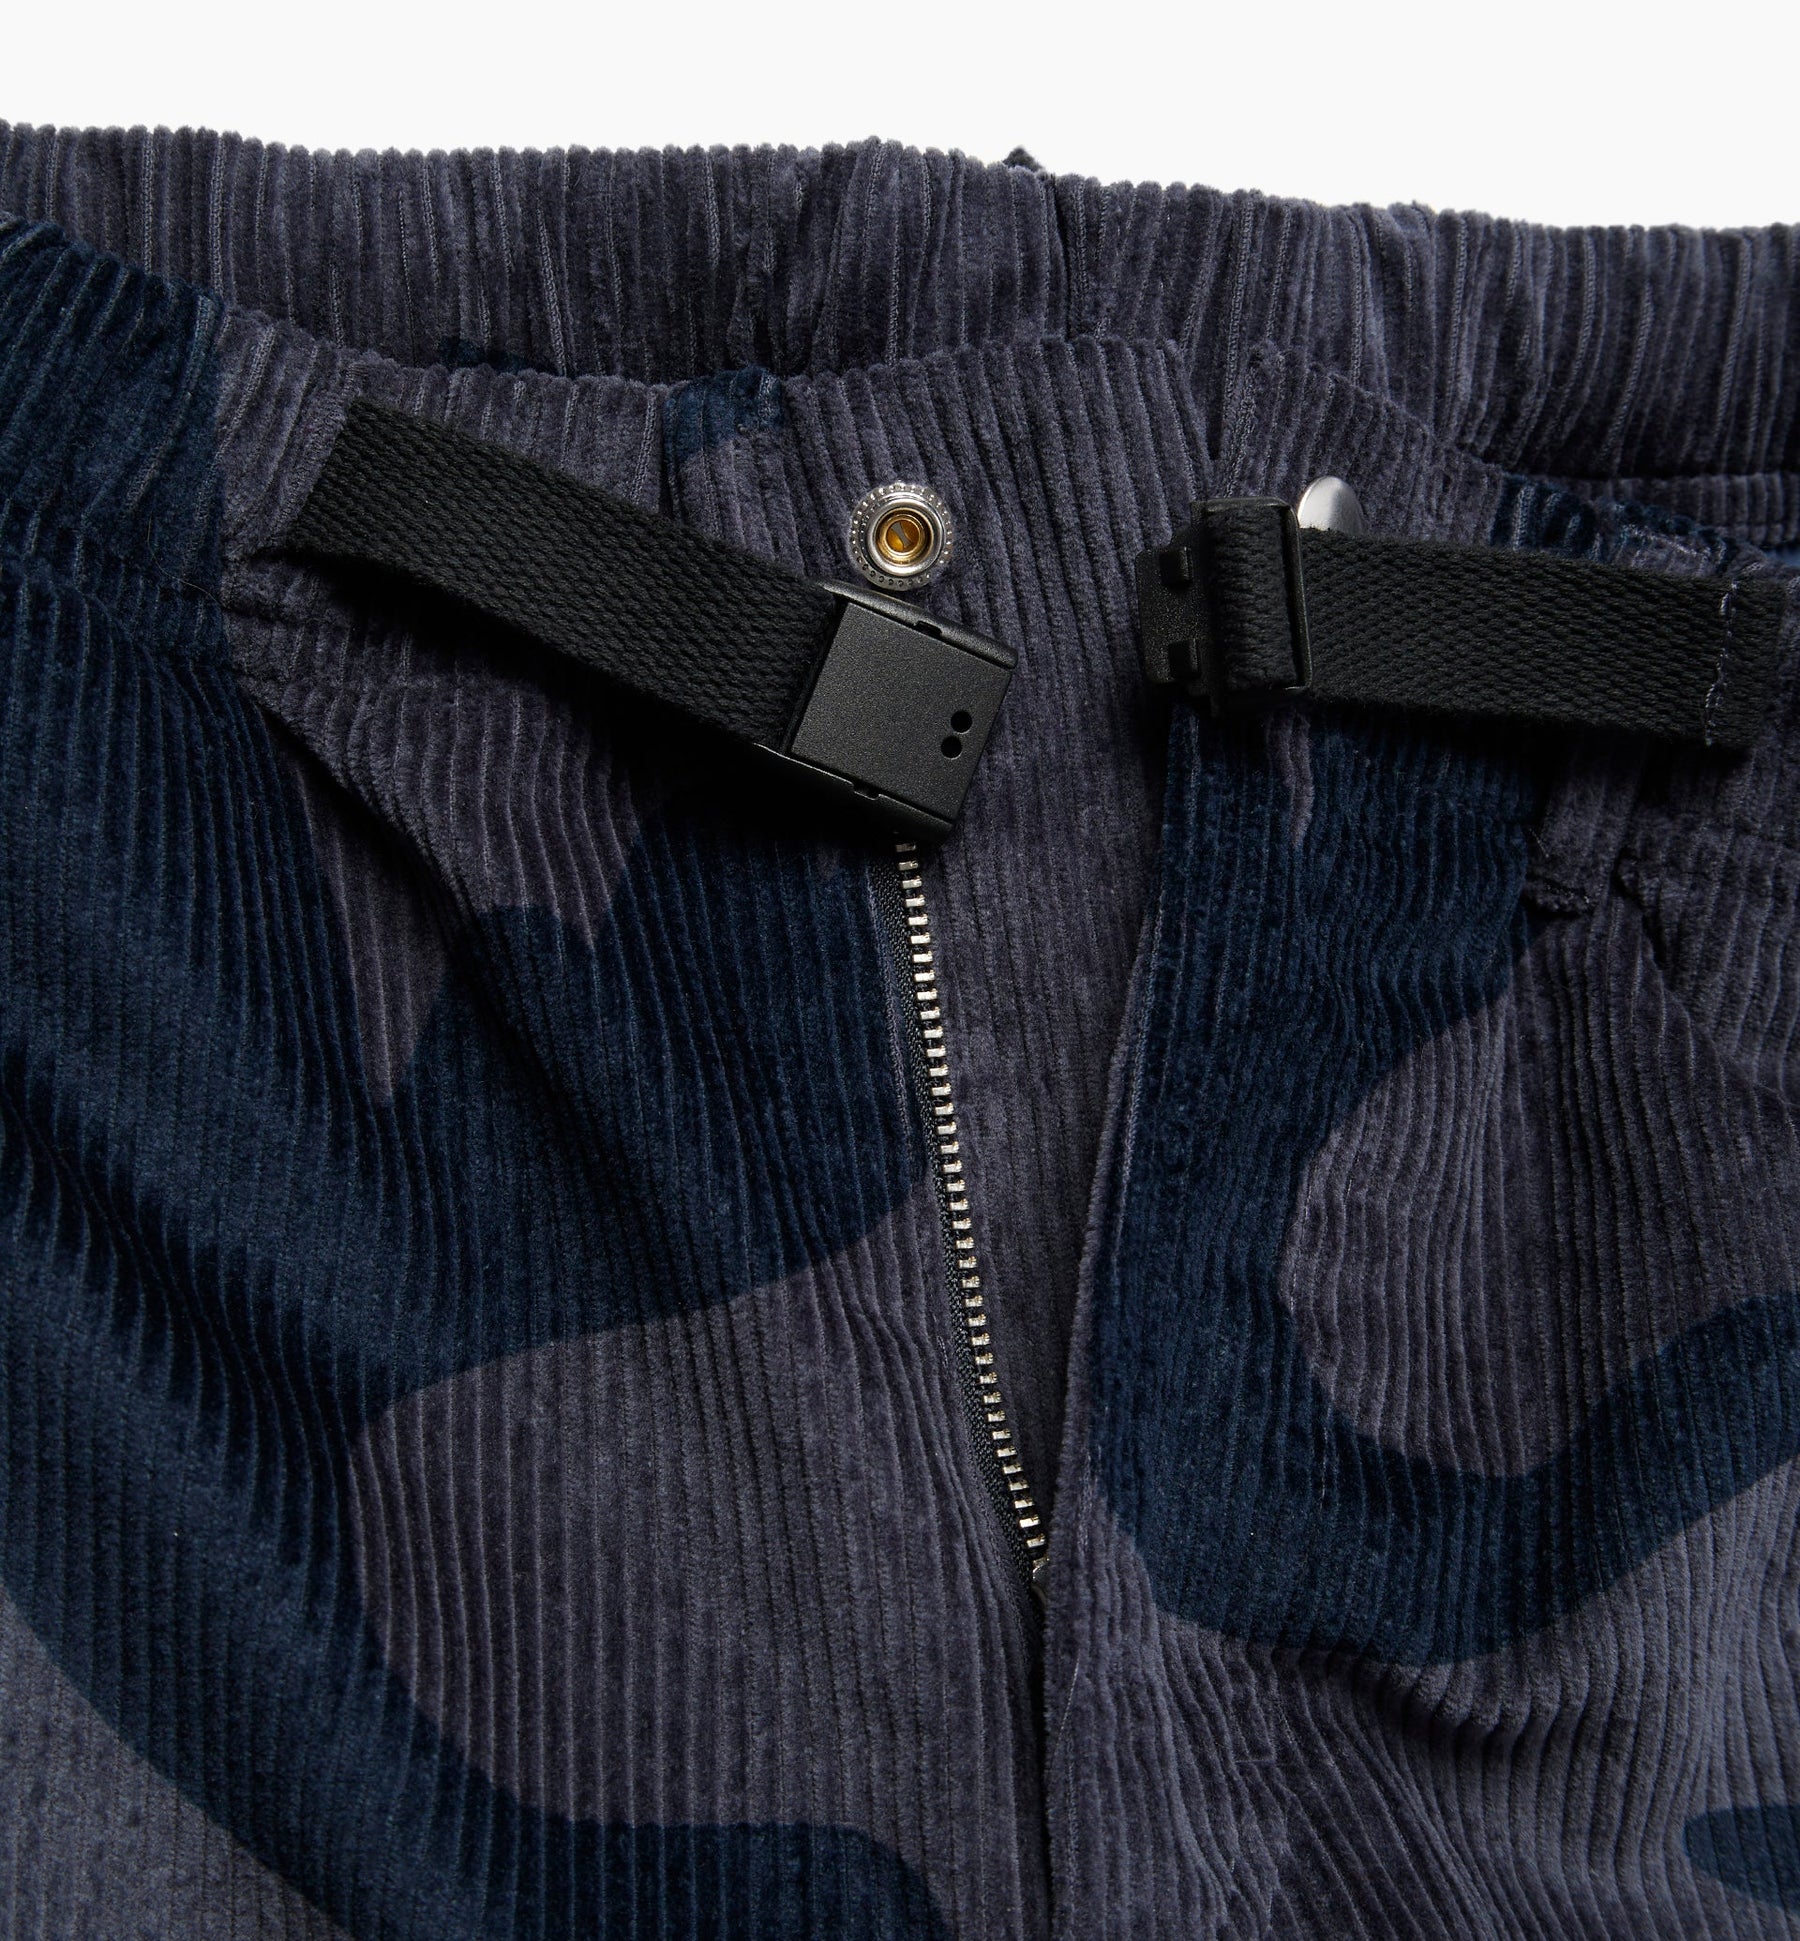 Clipped Wings Corduroy Pants in Greyish Blue